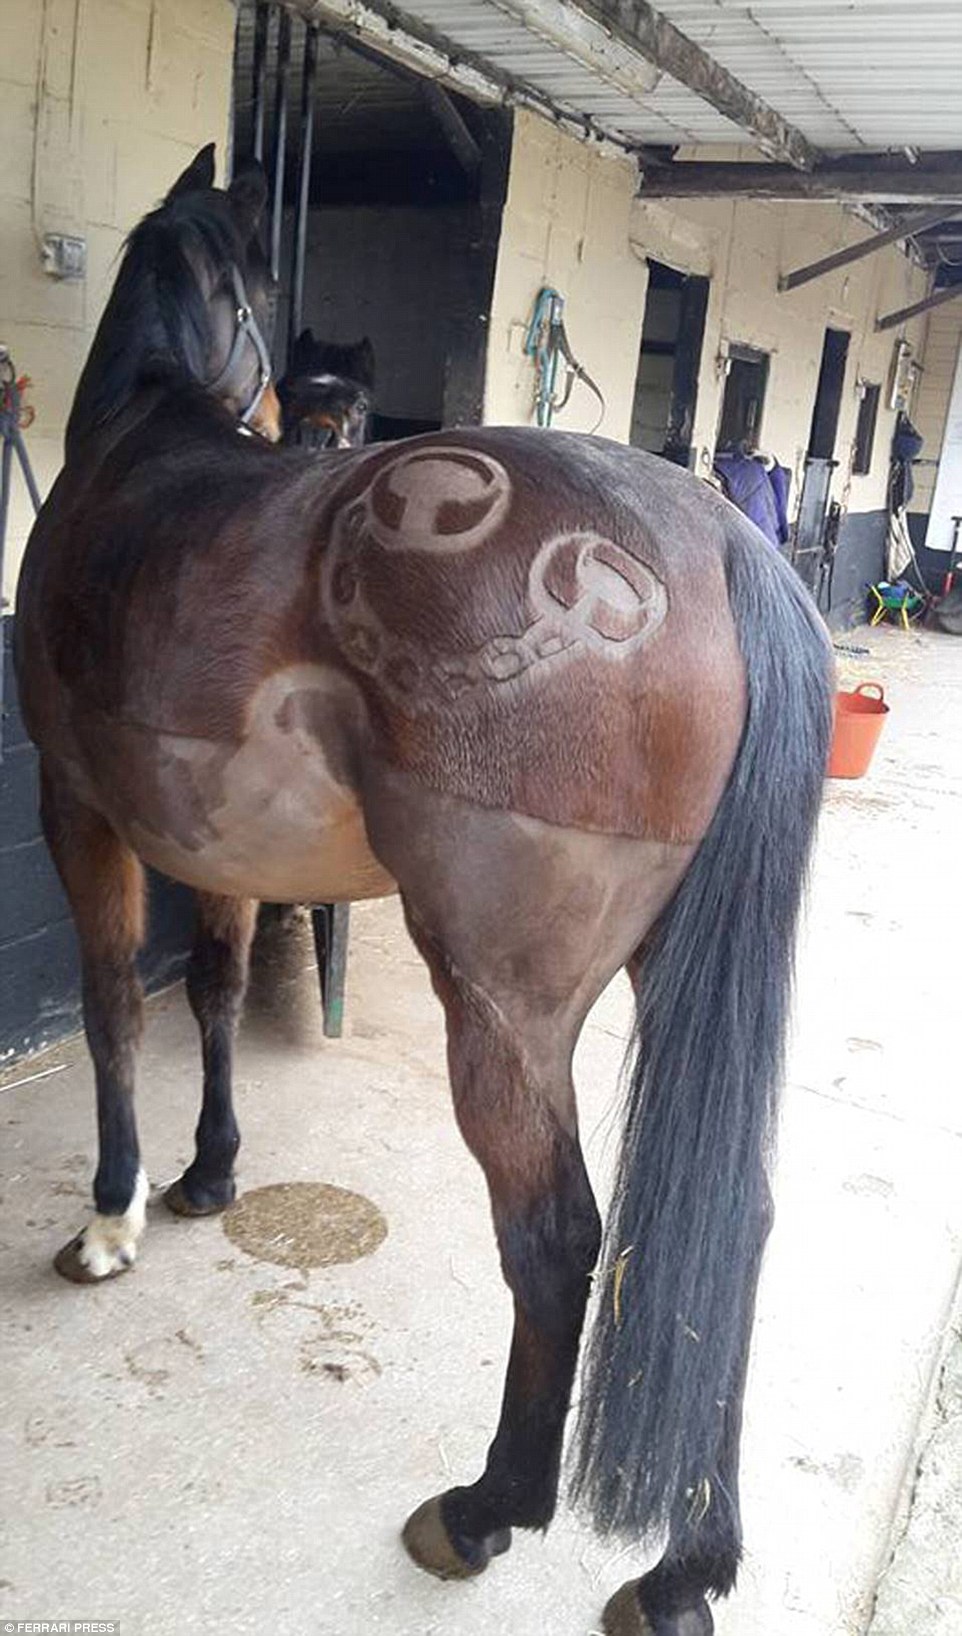 337DC45200000578-0-This_owner_wanted_chain_and_shackles_emblem_cut_into_their_horse-a-44_1461529042758.jpg